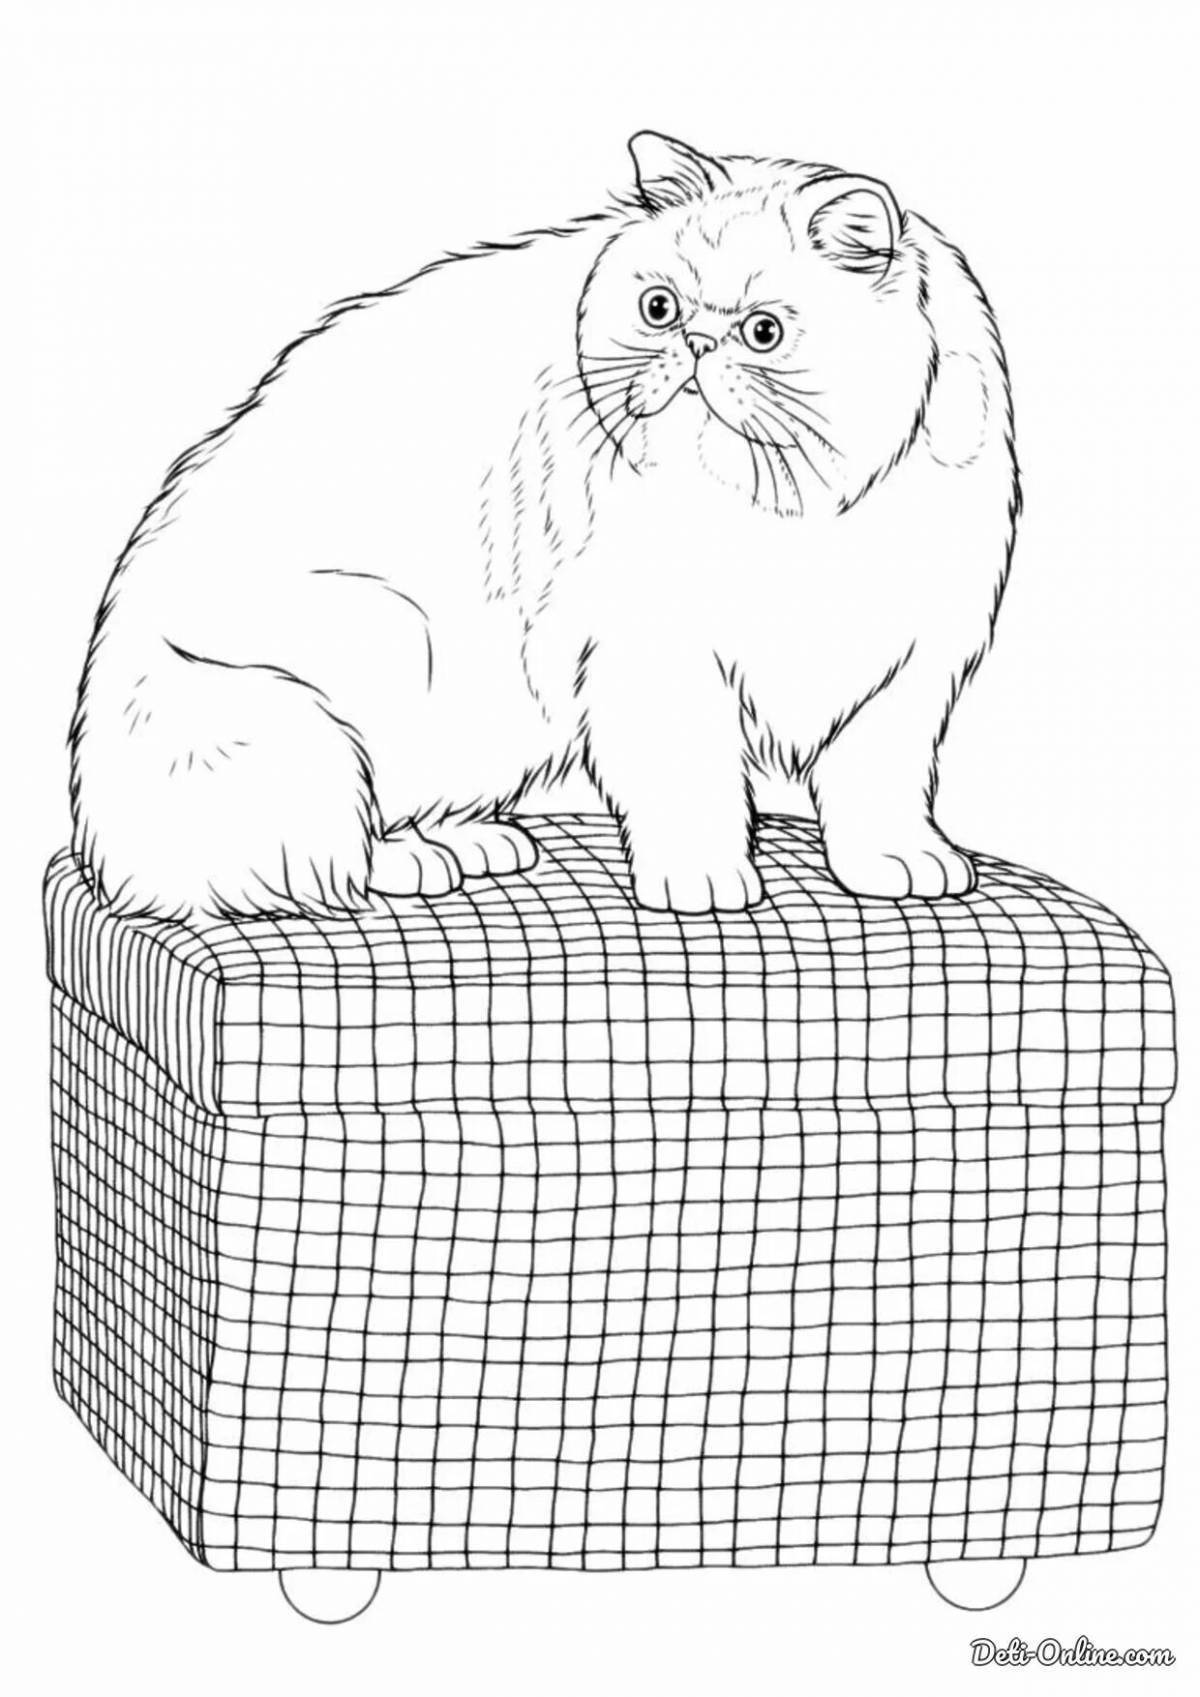 Coloring book shining cat in a box